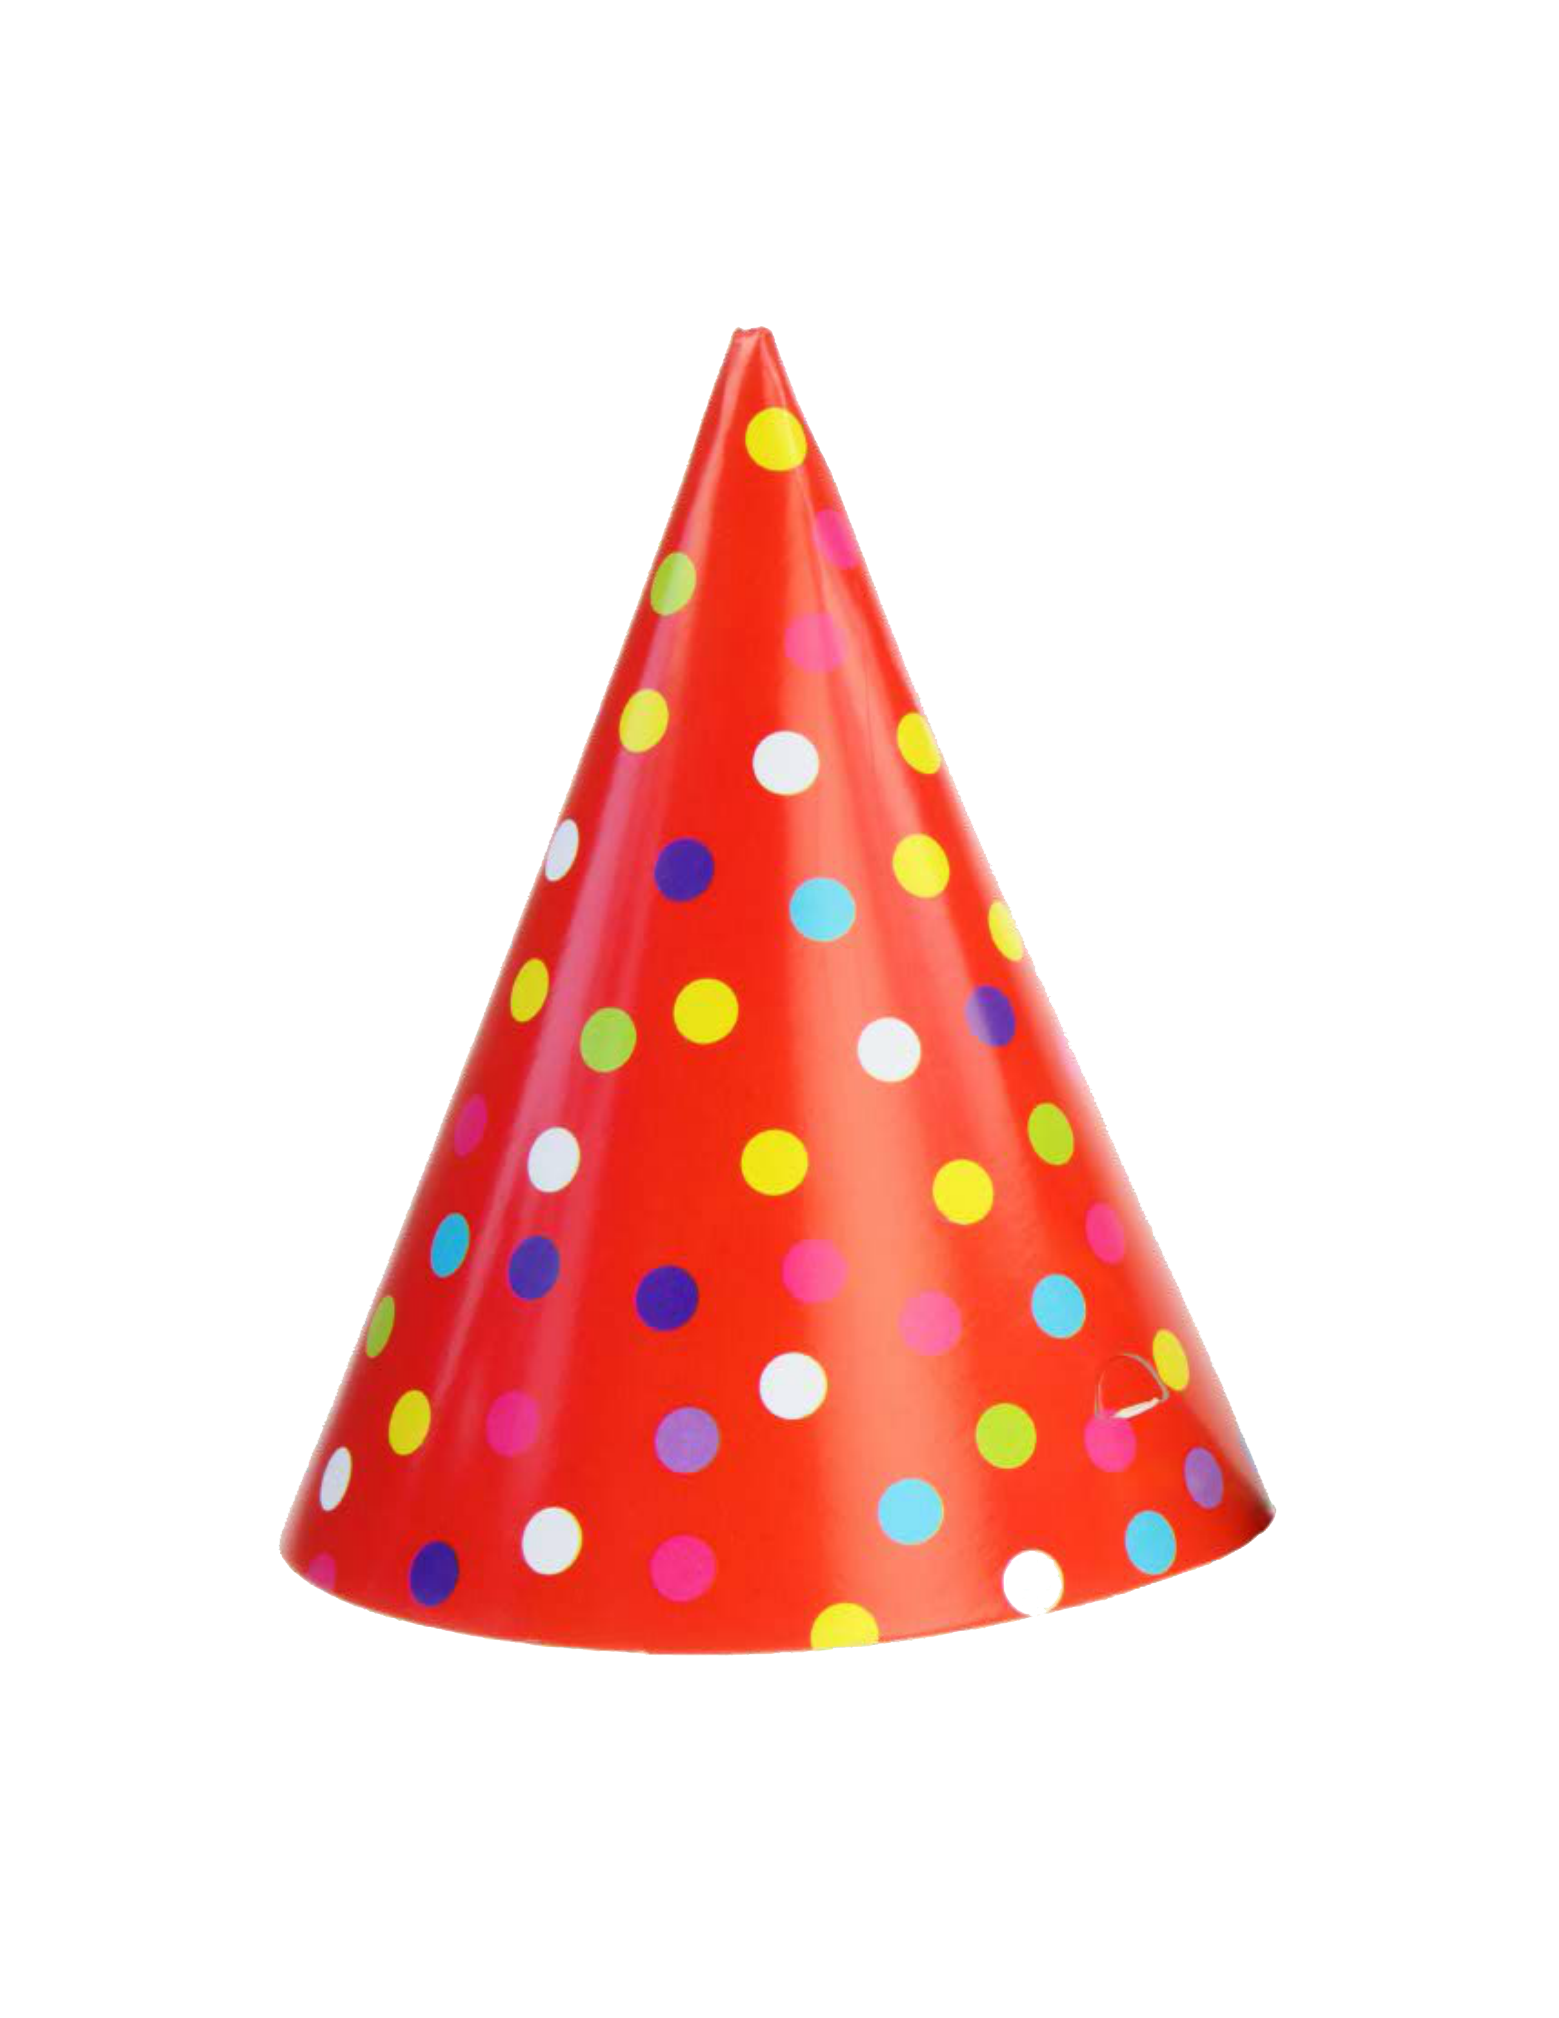 Download Party Hat PNG File PNG, SVG Clip art for Web - Download Clip Art, PNG Icon Arts